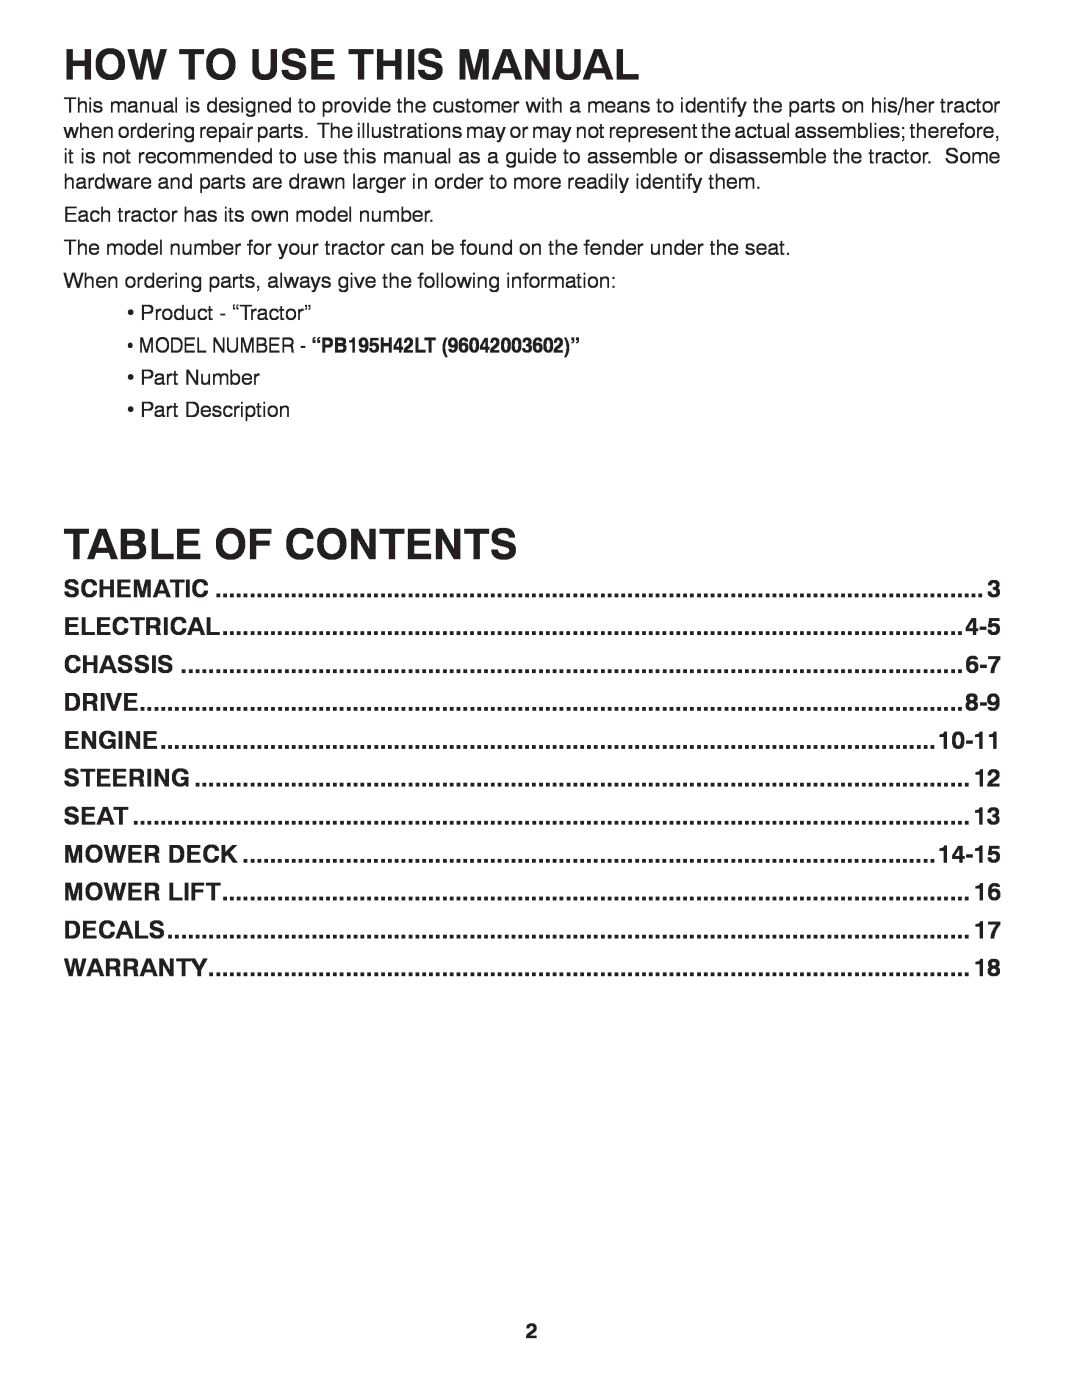 Poulan 96042003602 manual How To Use This Manual, Table Of Contents, Chassis, Drive, Engine, Mower Deck 